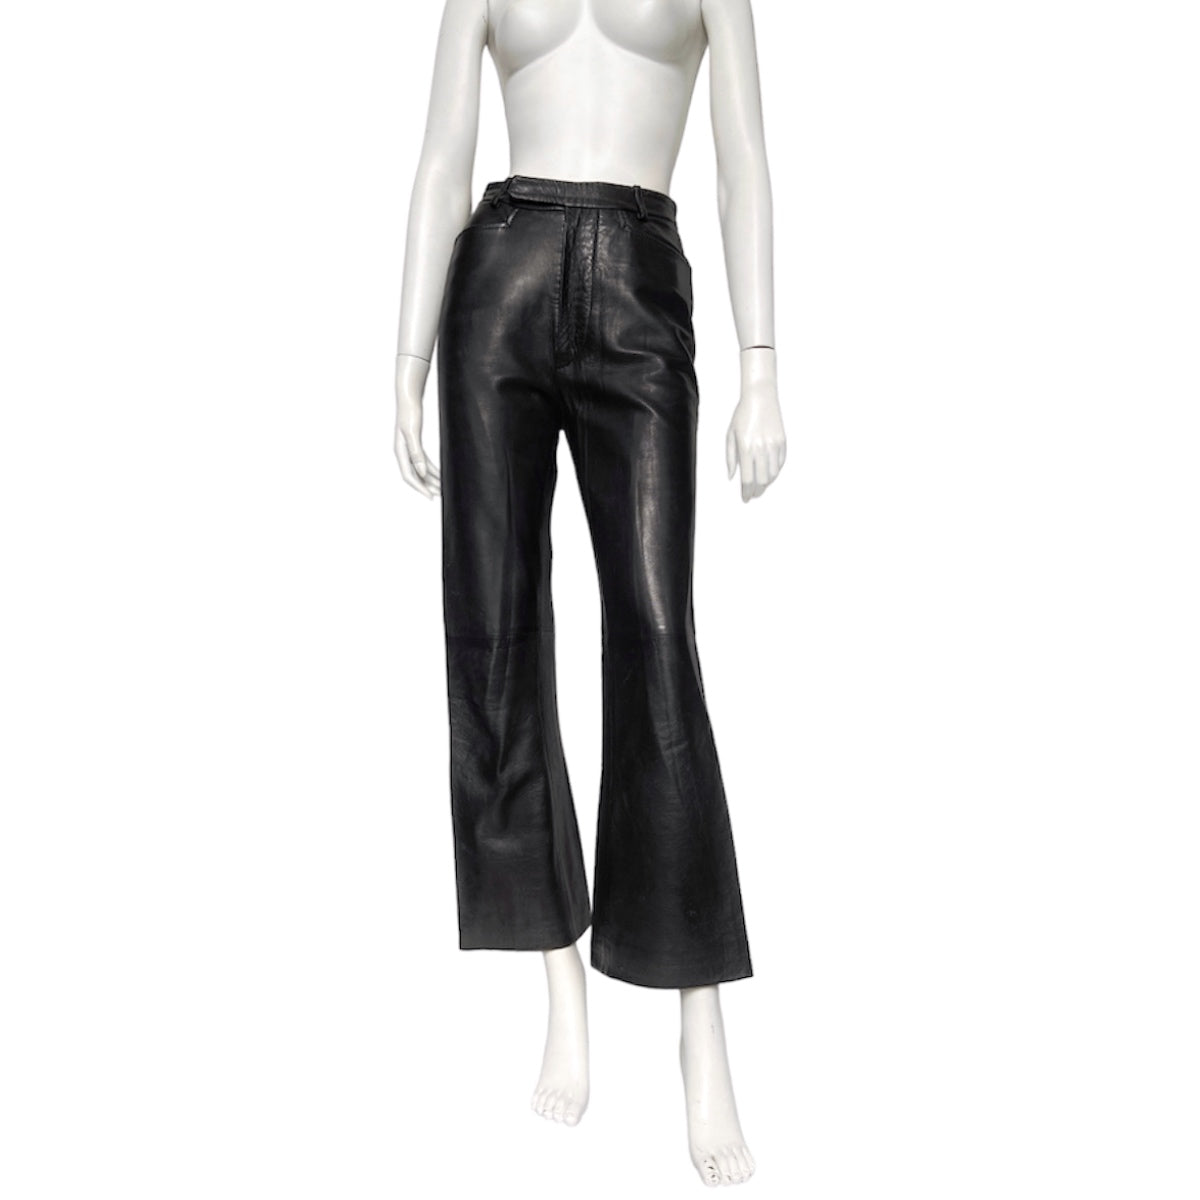 Gucci by Tom Ford 1999 Flared Leather Pants